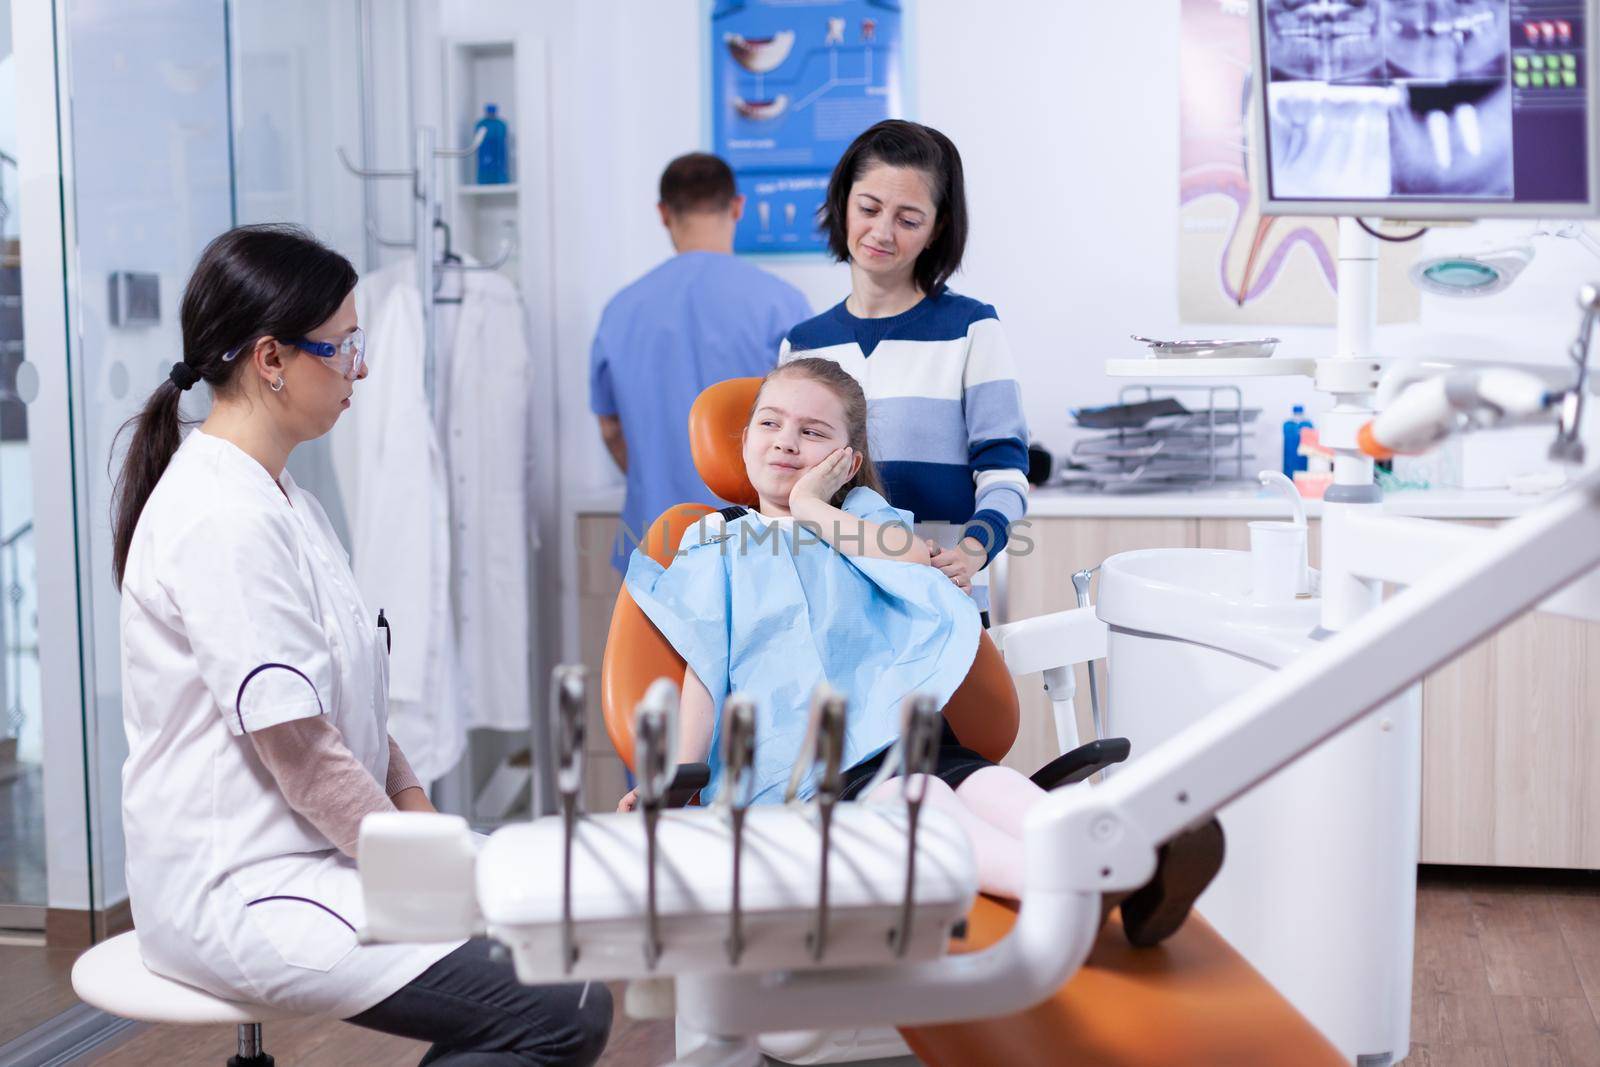 Little girl in pediatric dentist office touching face with painful expression by DCStudio